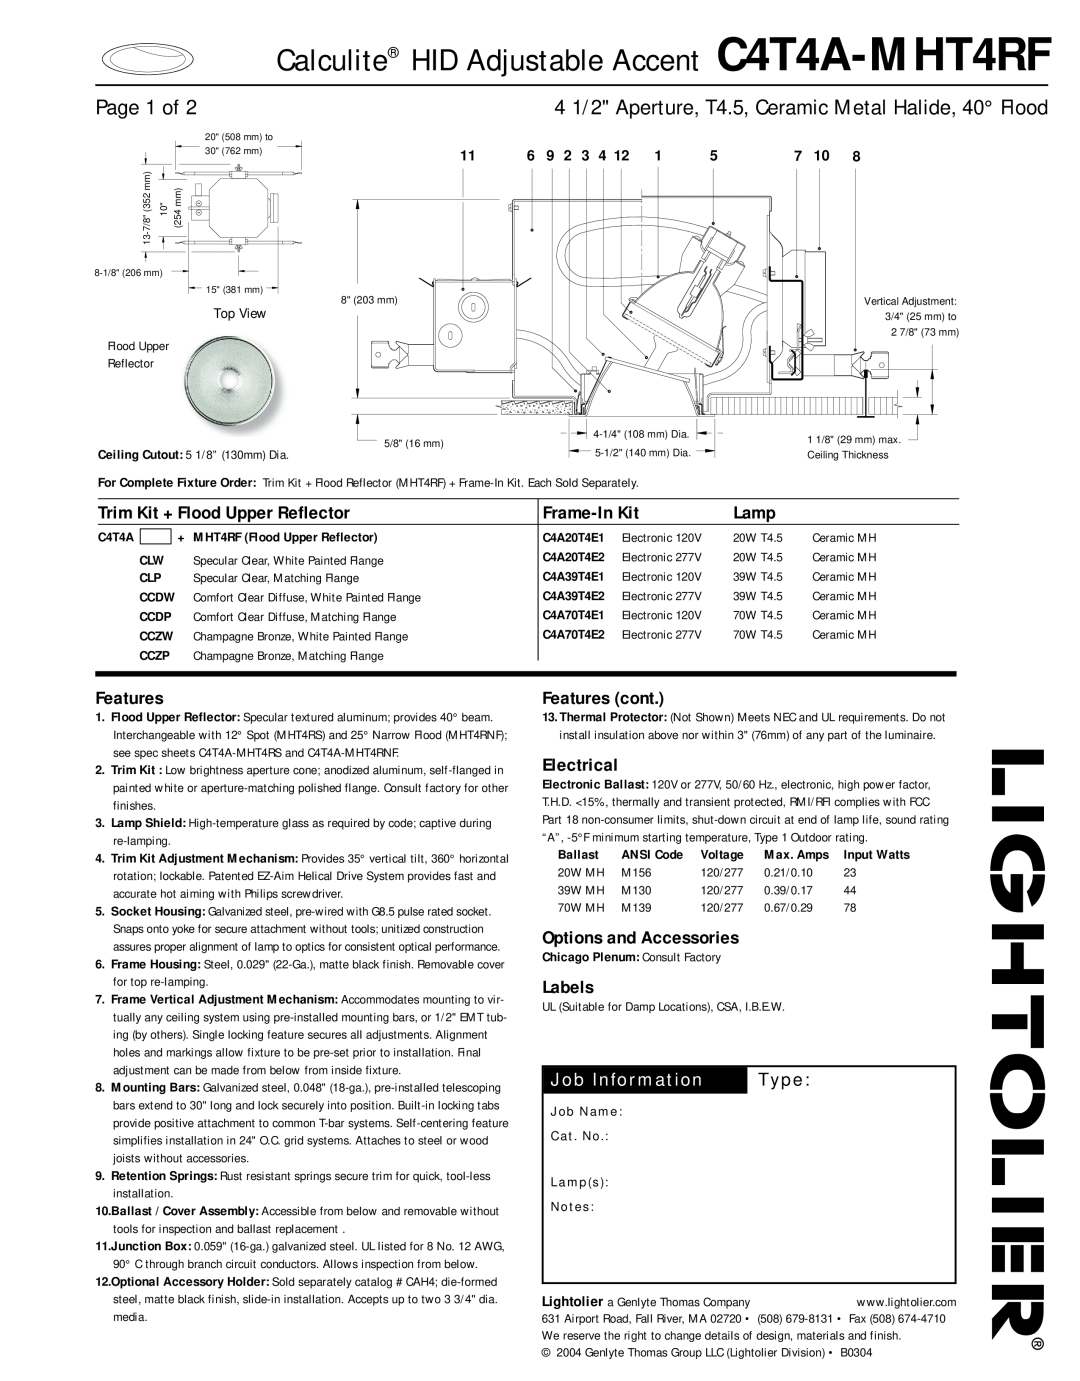 Lightolier manual Calculite HID Adjustable Accent C4T4A-MHT4RF, Page 1 of, Job Information, Type, Frame-InKit, Lamp 